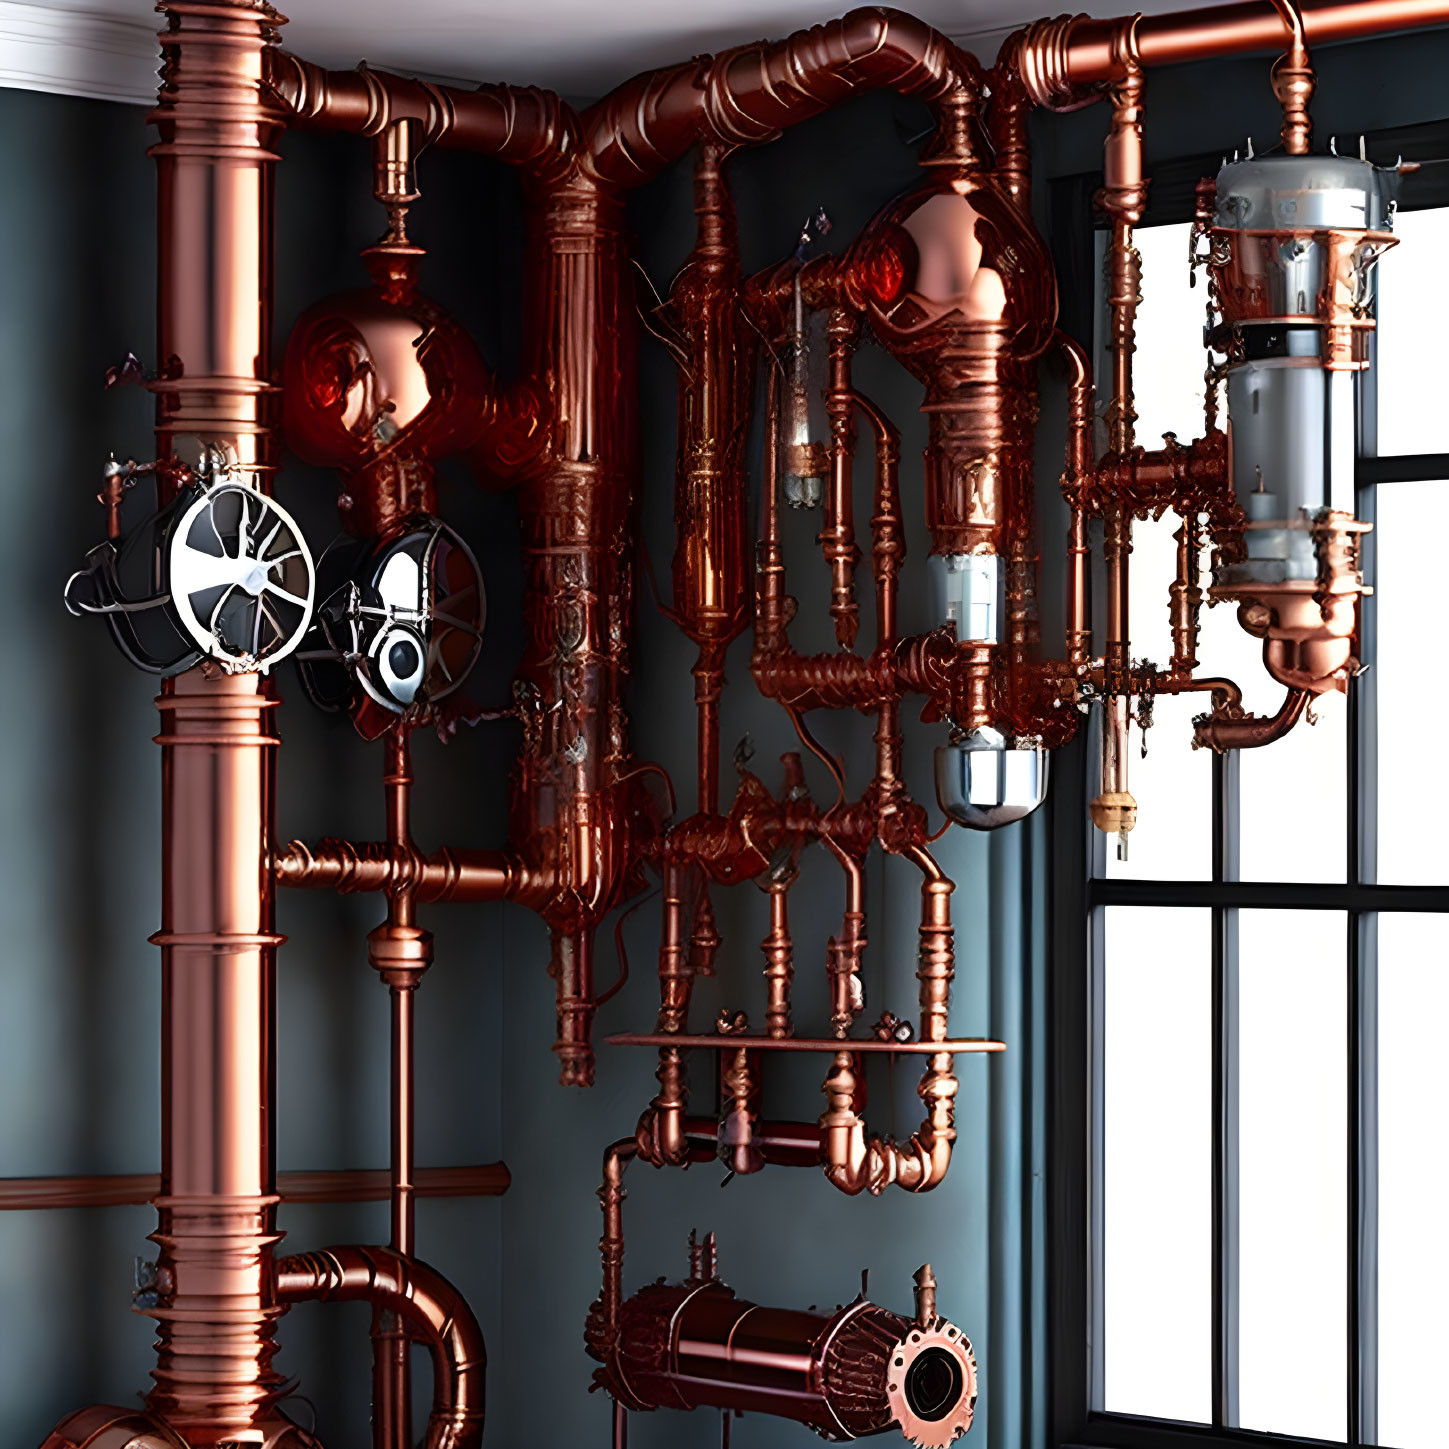 Polished Copper Pipes and Valves on Dark Wall: Modern Industrial Aesthetics